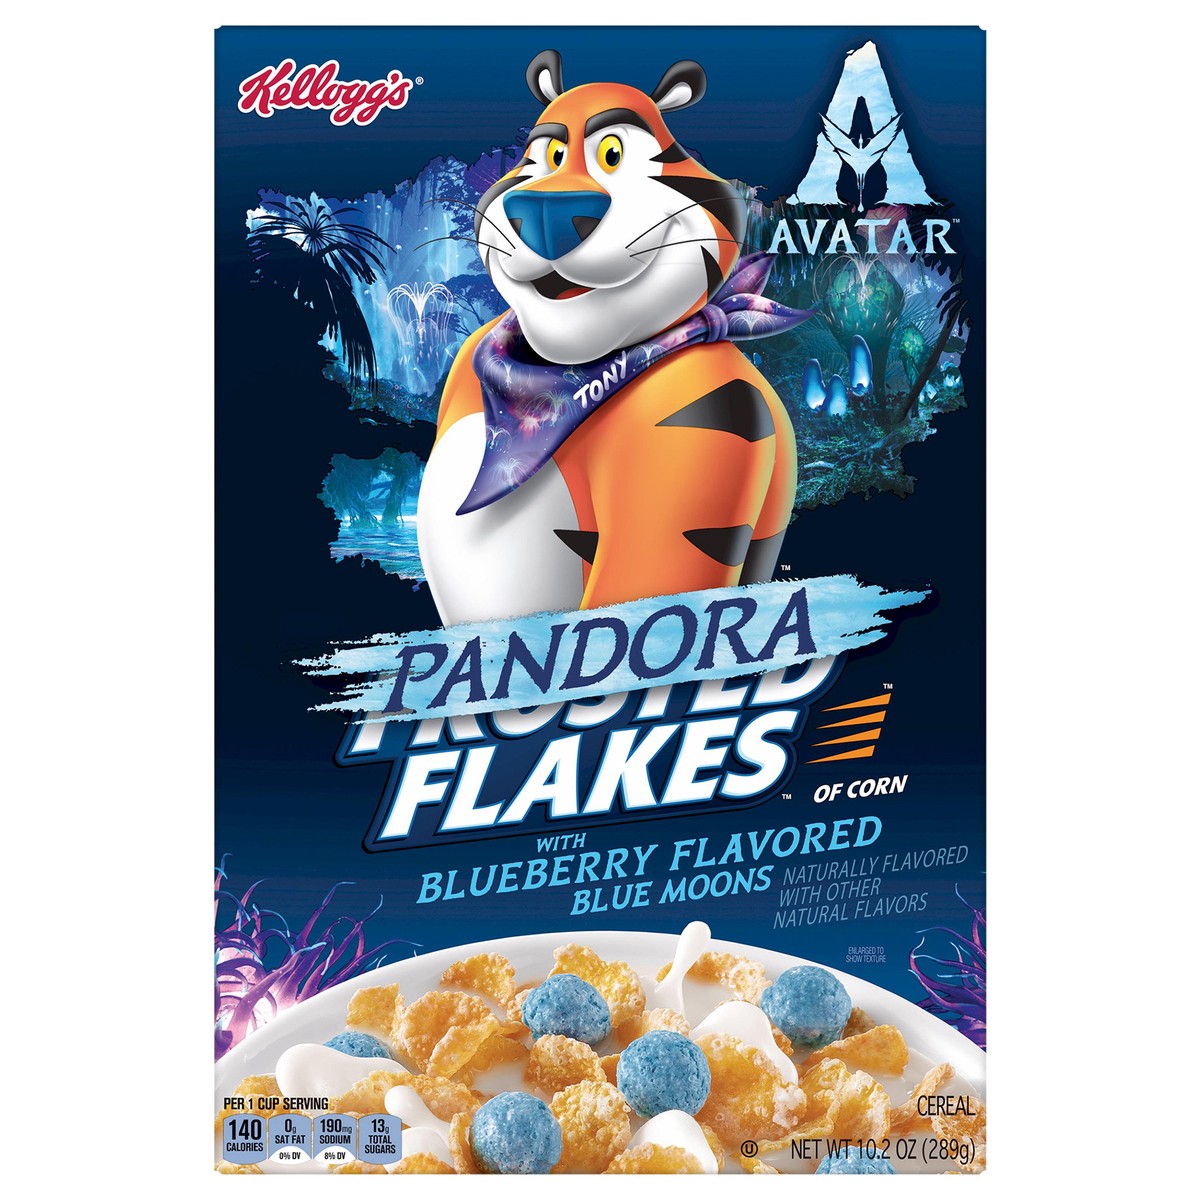 slide 2 of 10, Frosted Flakes Kellogg's Frosted Flakes Avatar Breakfast Cereal, Pandora Cereal, Kids Snacks, Original with Blueberry Flavored Blue Moons, 10.2oz, 1 Box, 10.2 oz